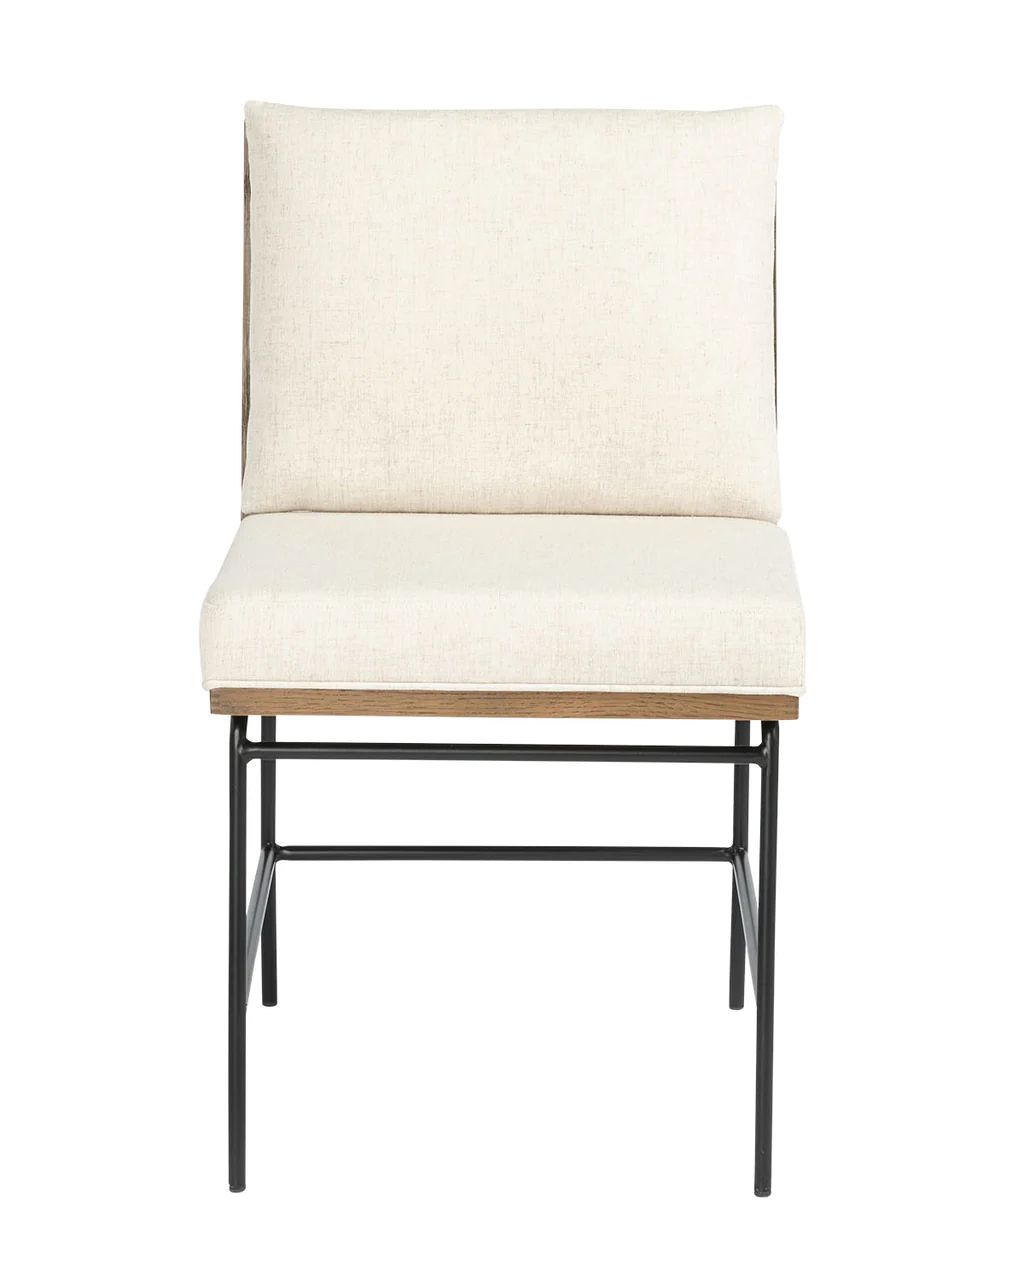 Selas Dining Chair | McGee & Co.